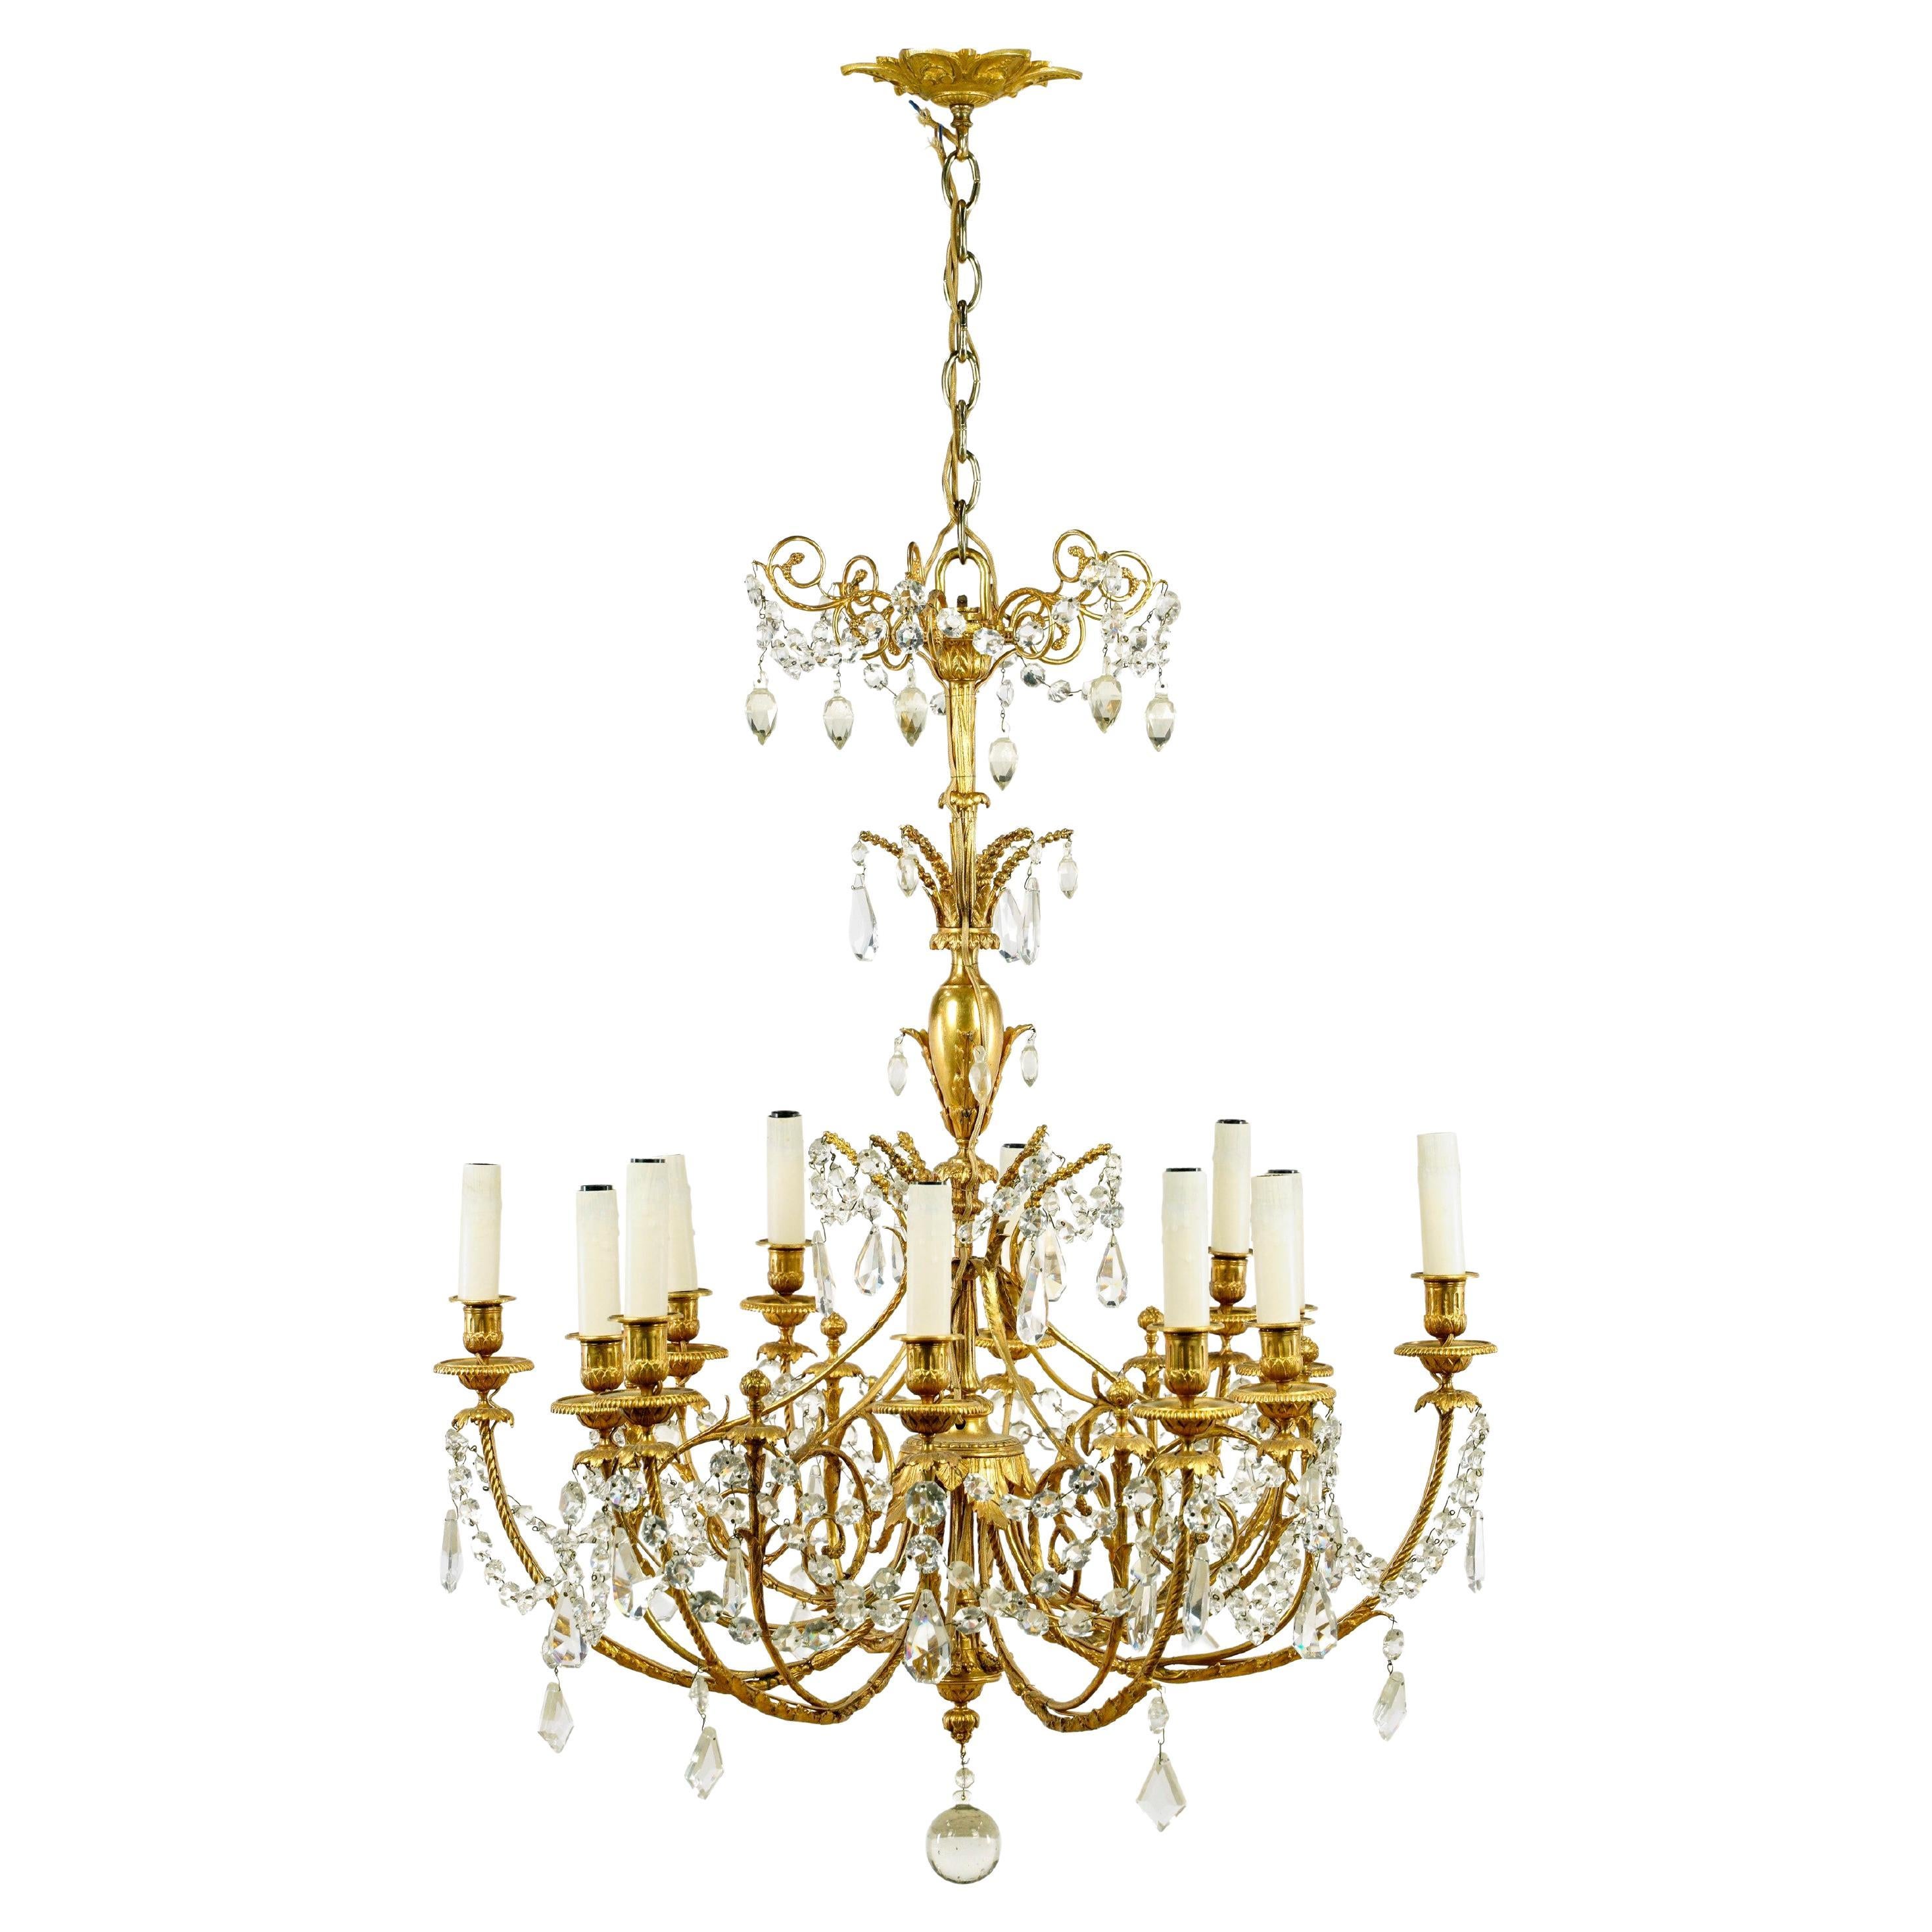 Good Antique French 12 Arm Gold Plated Crystal Chandelier For Sale